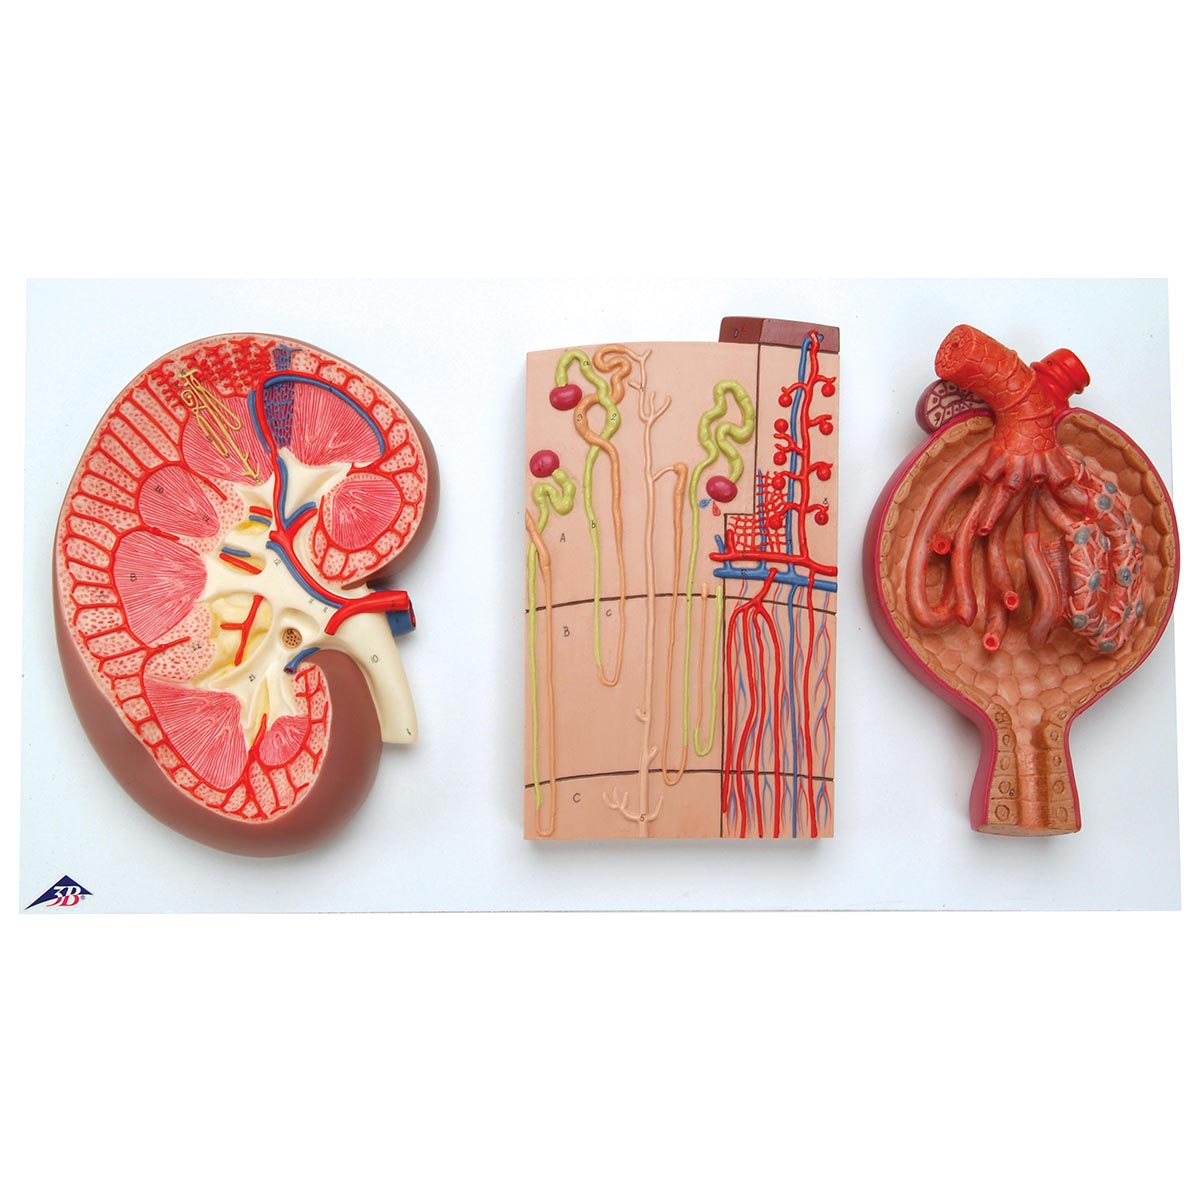 K11 Human Kidney Section Model with Nephrons, Blood Vessels & Renal Corpuscle - 3B Smart Anatomy